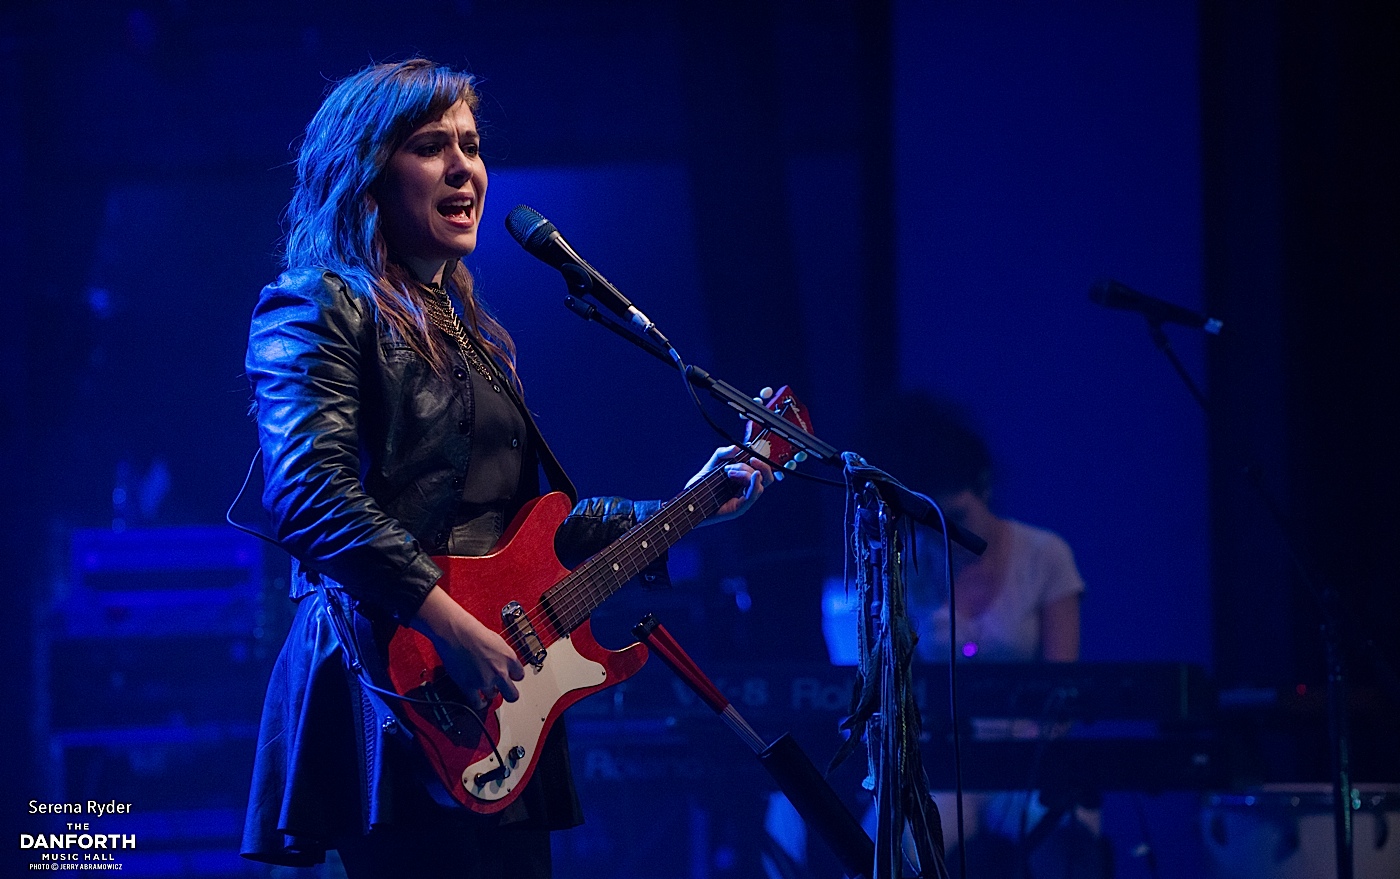 SERENA RYDER plays to a packed house at The Danforth Music Hall.